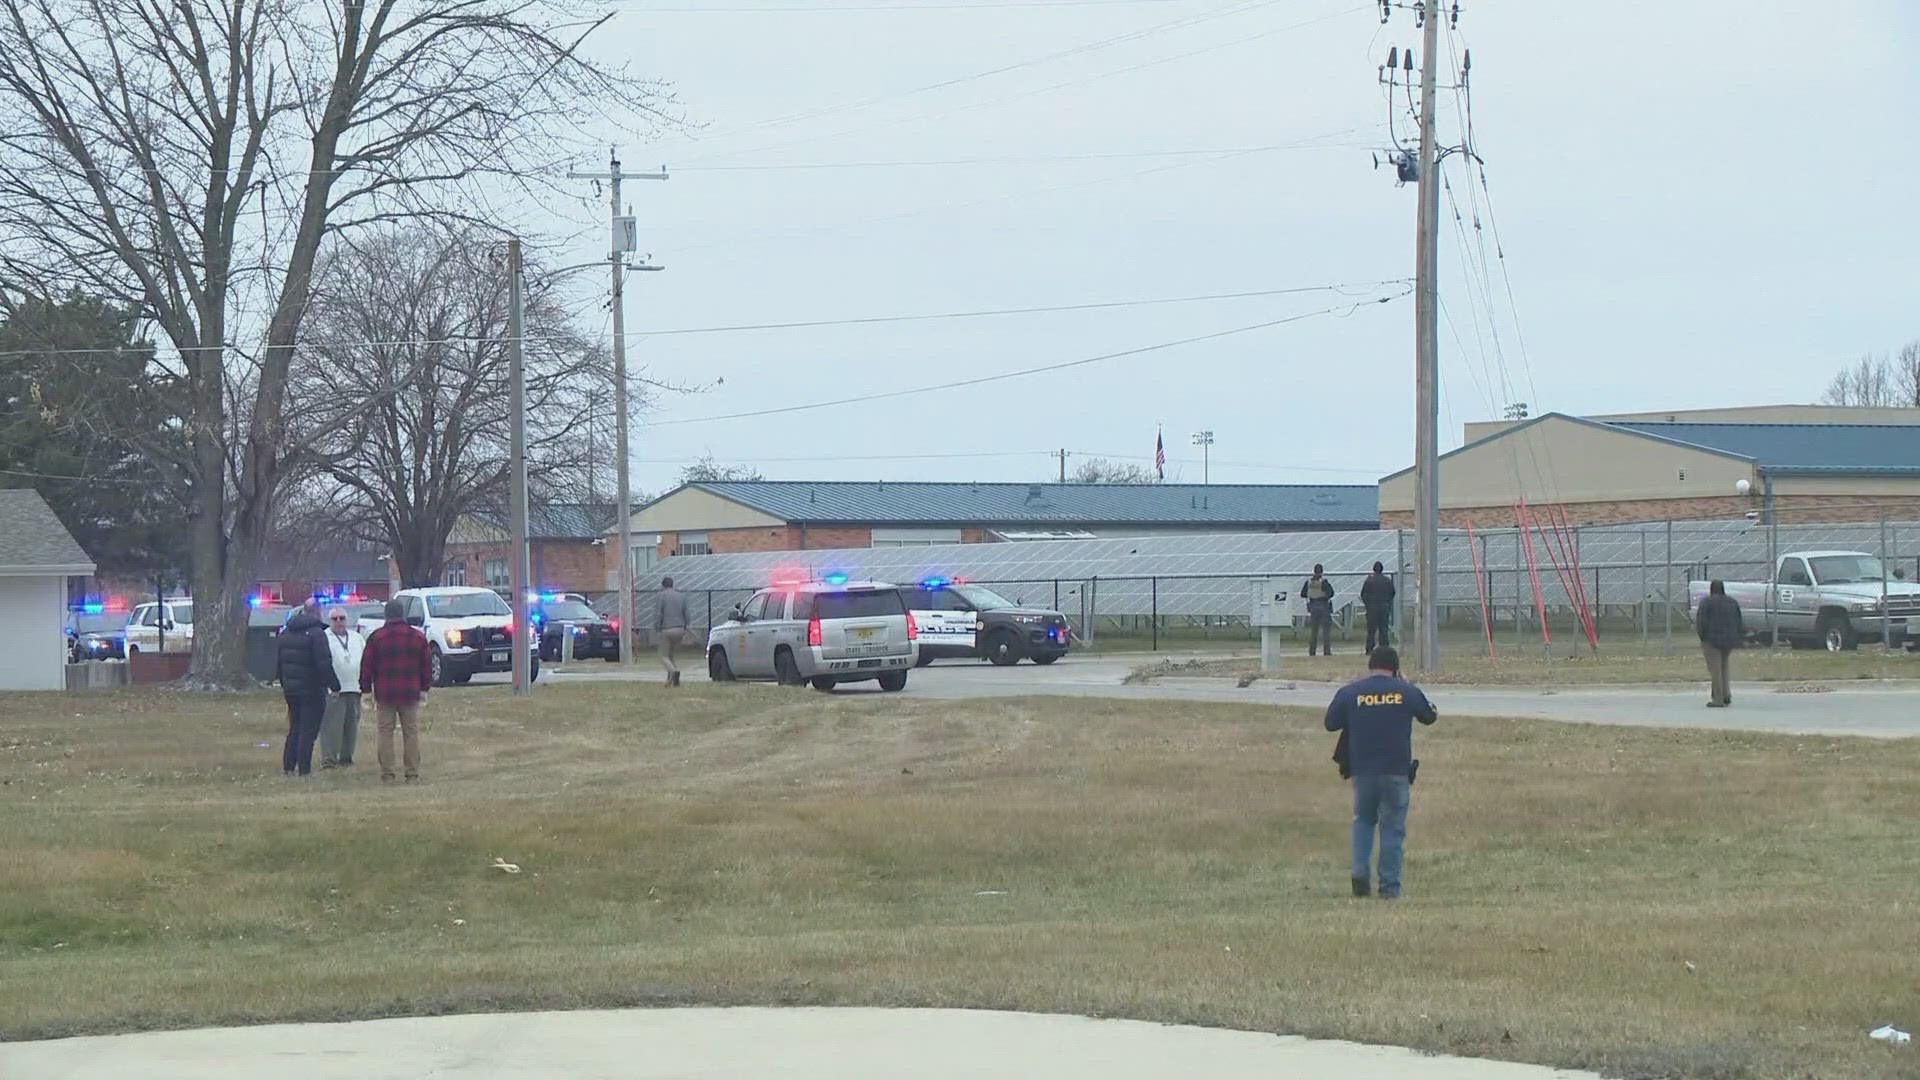 Authorities said the shooting happened on the student's first day back in classes after their annual winter break.